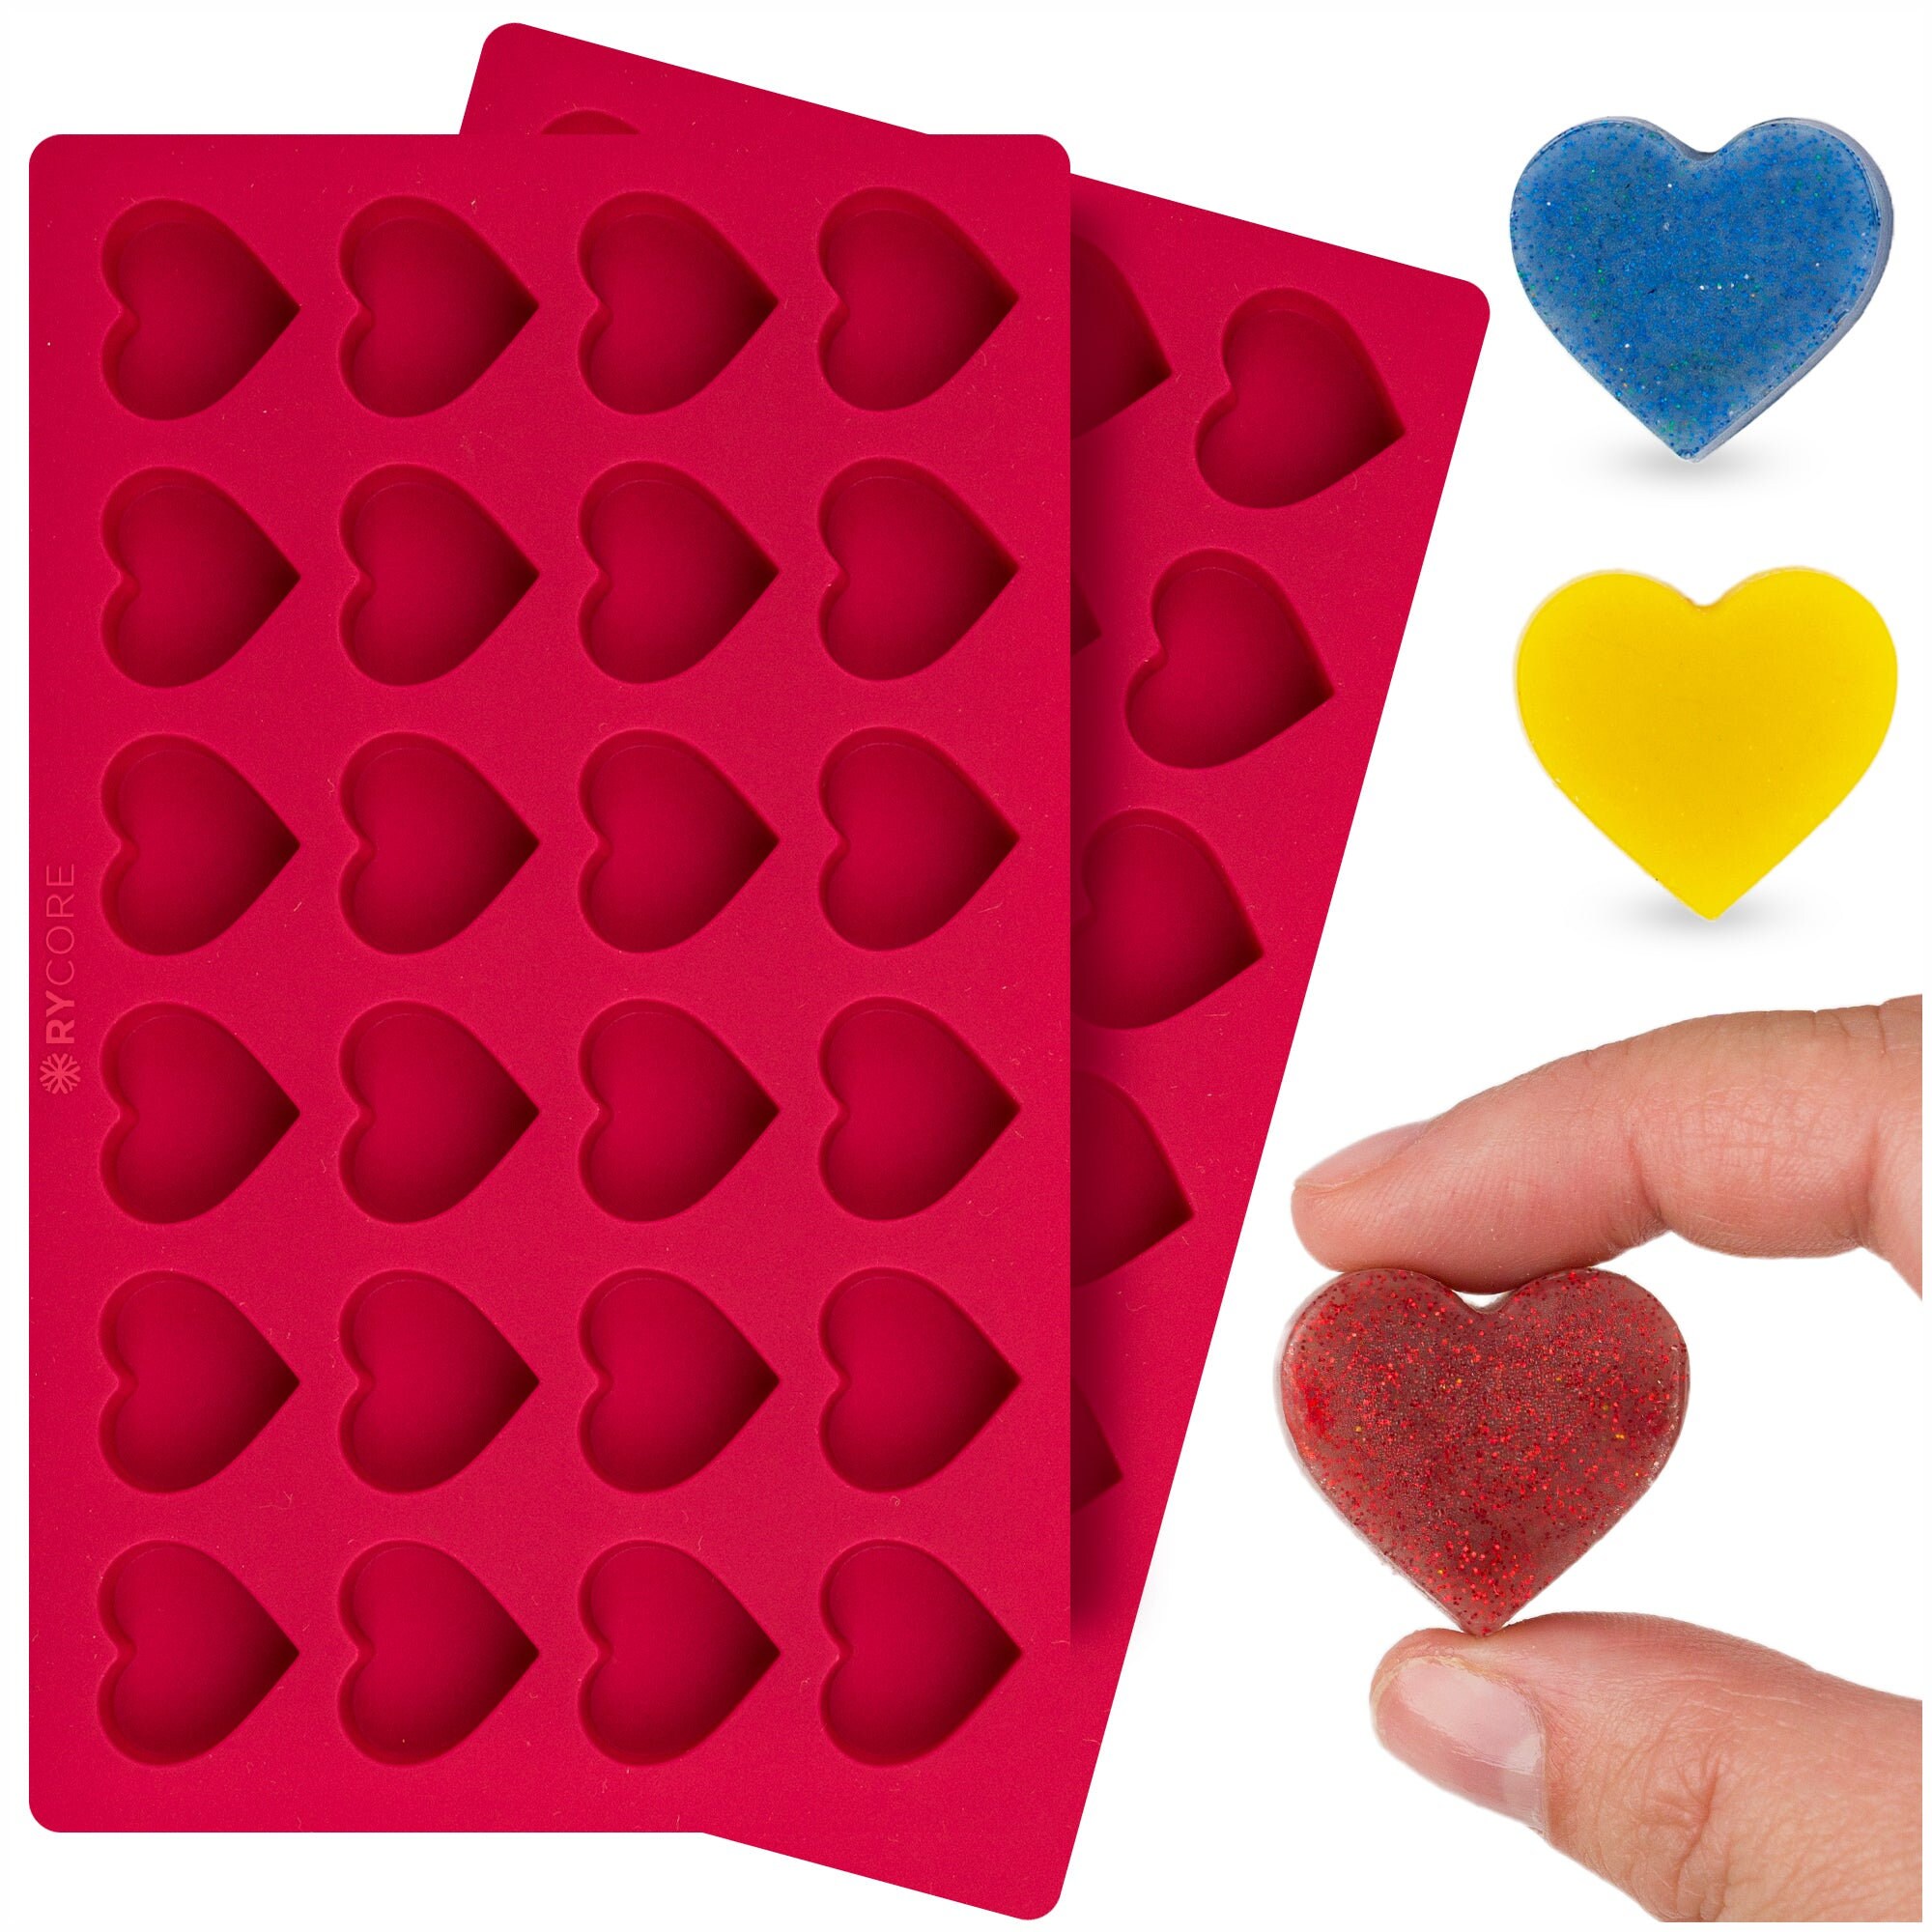 2 Pack Silicone Heart Mold Design Silicone Molds for 